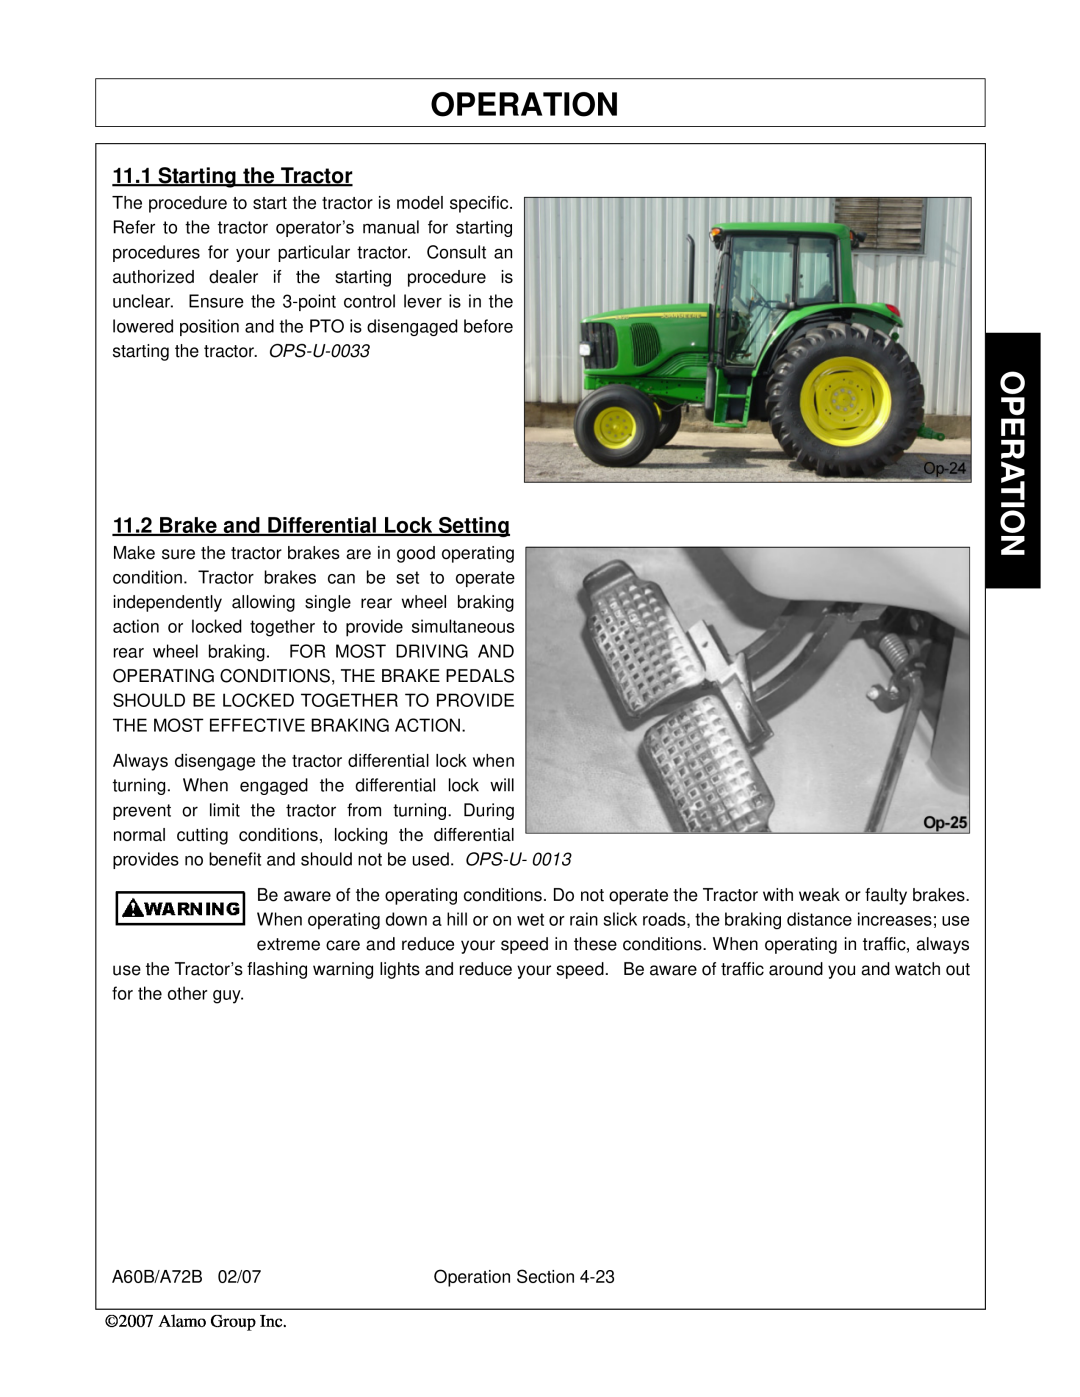 Alamo A72B, A60B, 00759354C manual Starting the Tractor, Brake and Differential Lock Setting, Operation 